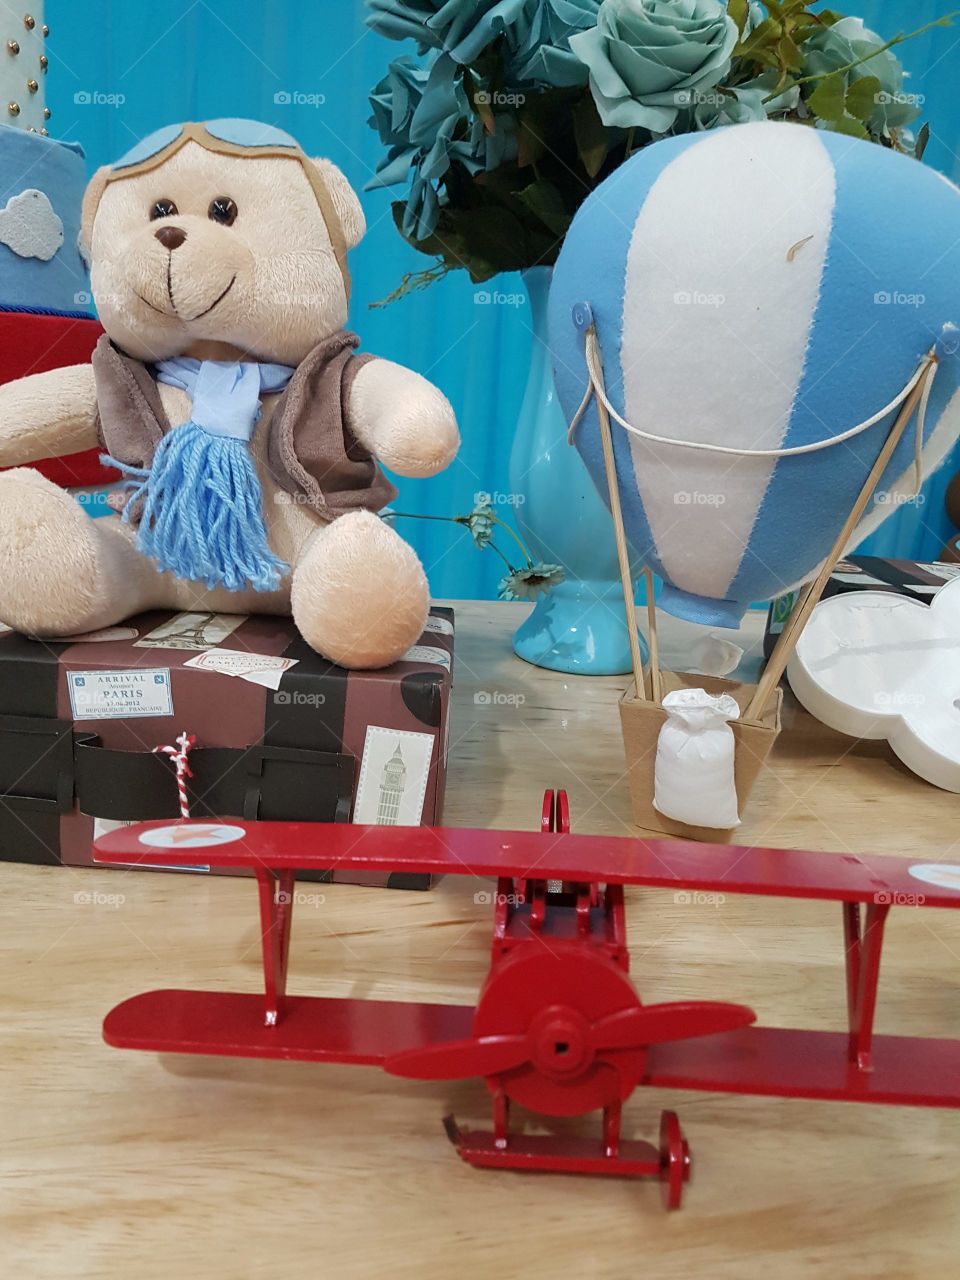 Children's birthday ornaments. The balloon, airplane and the bear.